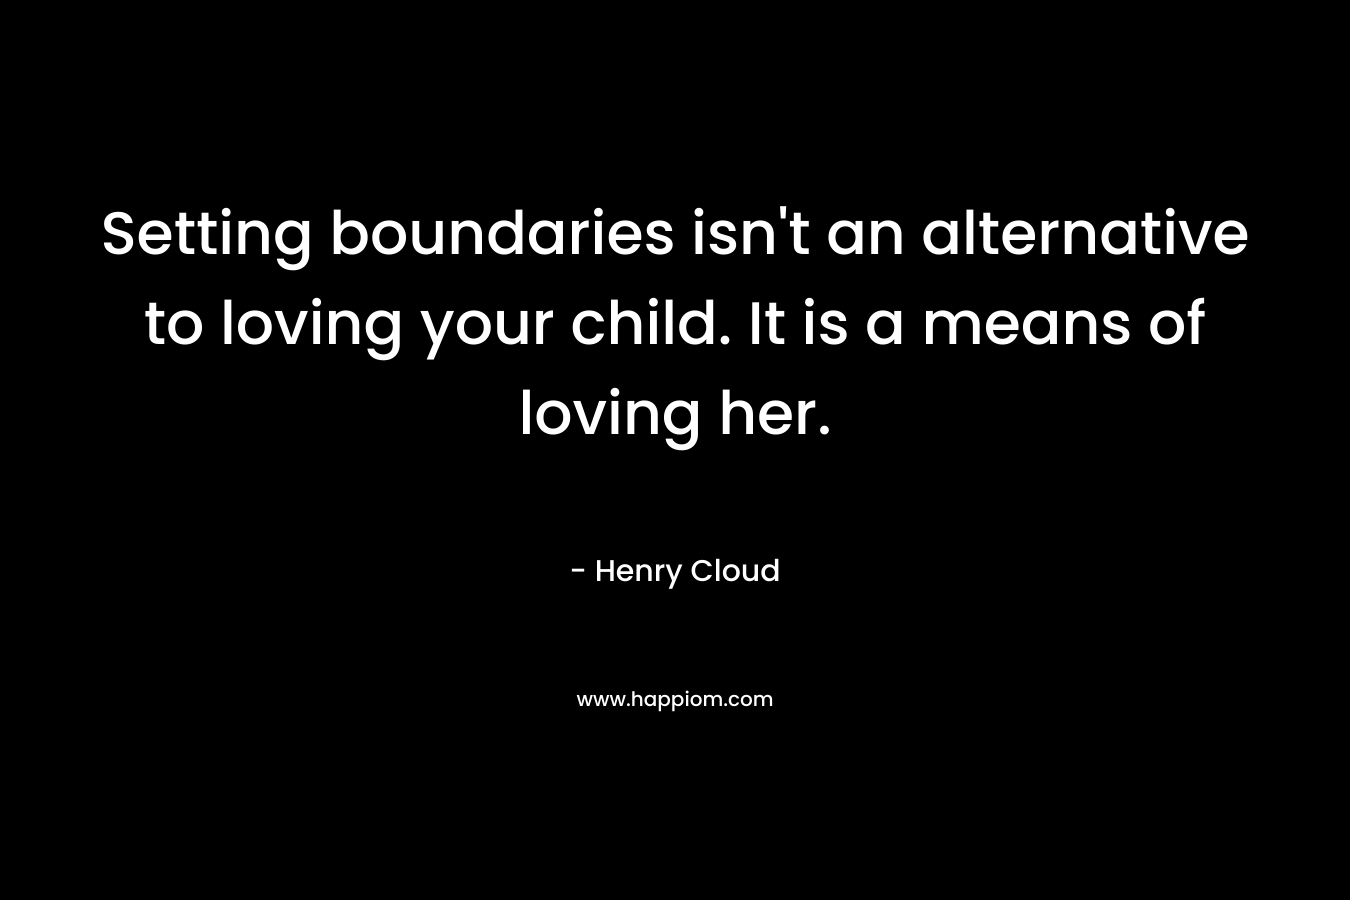 Setting boundaries isn't an alternative to loving your child. It is a means of loving her.